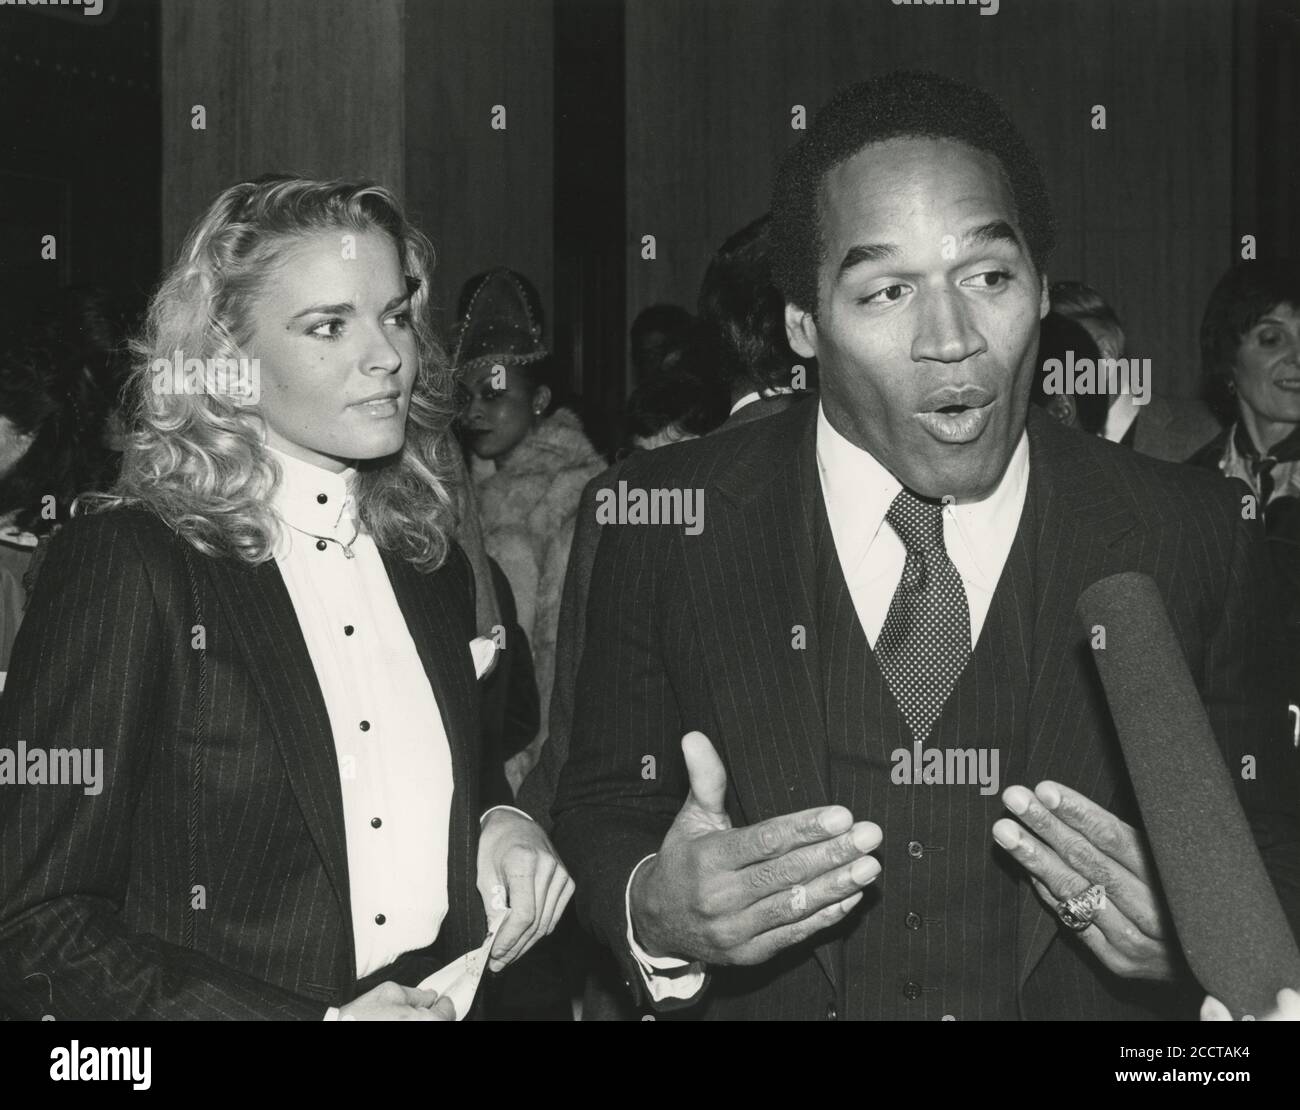 Los Angeles.CA.USA.  LIBRARY. O. J. Simpson and Nicole Brown Simpson at an event in mid 1980s. The couple began dating in 1979. Married in 1985 . Divorced 1992. Brown Simpson was murdered 12th June 1994. O.J. Simpson was tried for her murder but acquitted.   UPDATED:12.08.2020 Ref:LMK30-SLIB120820PBOR-001 Peter Borsari/PIP-Landmark MediaWWW.LMKMEDIA.COM. Stock Photo